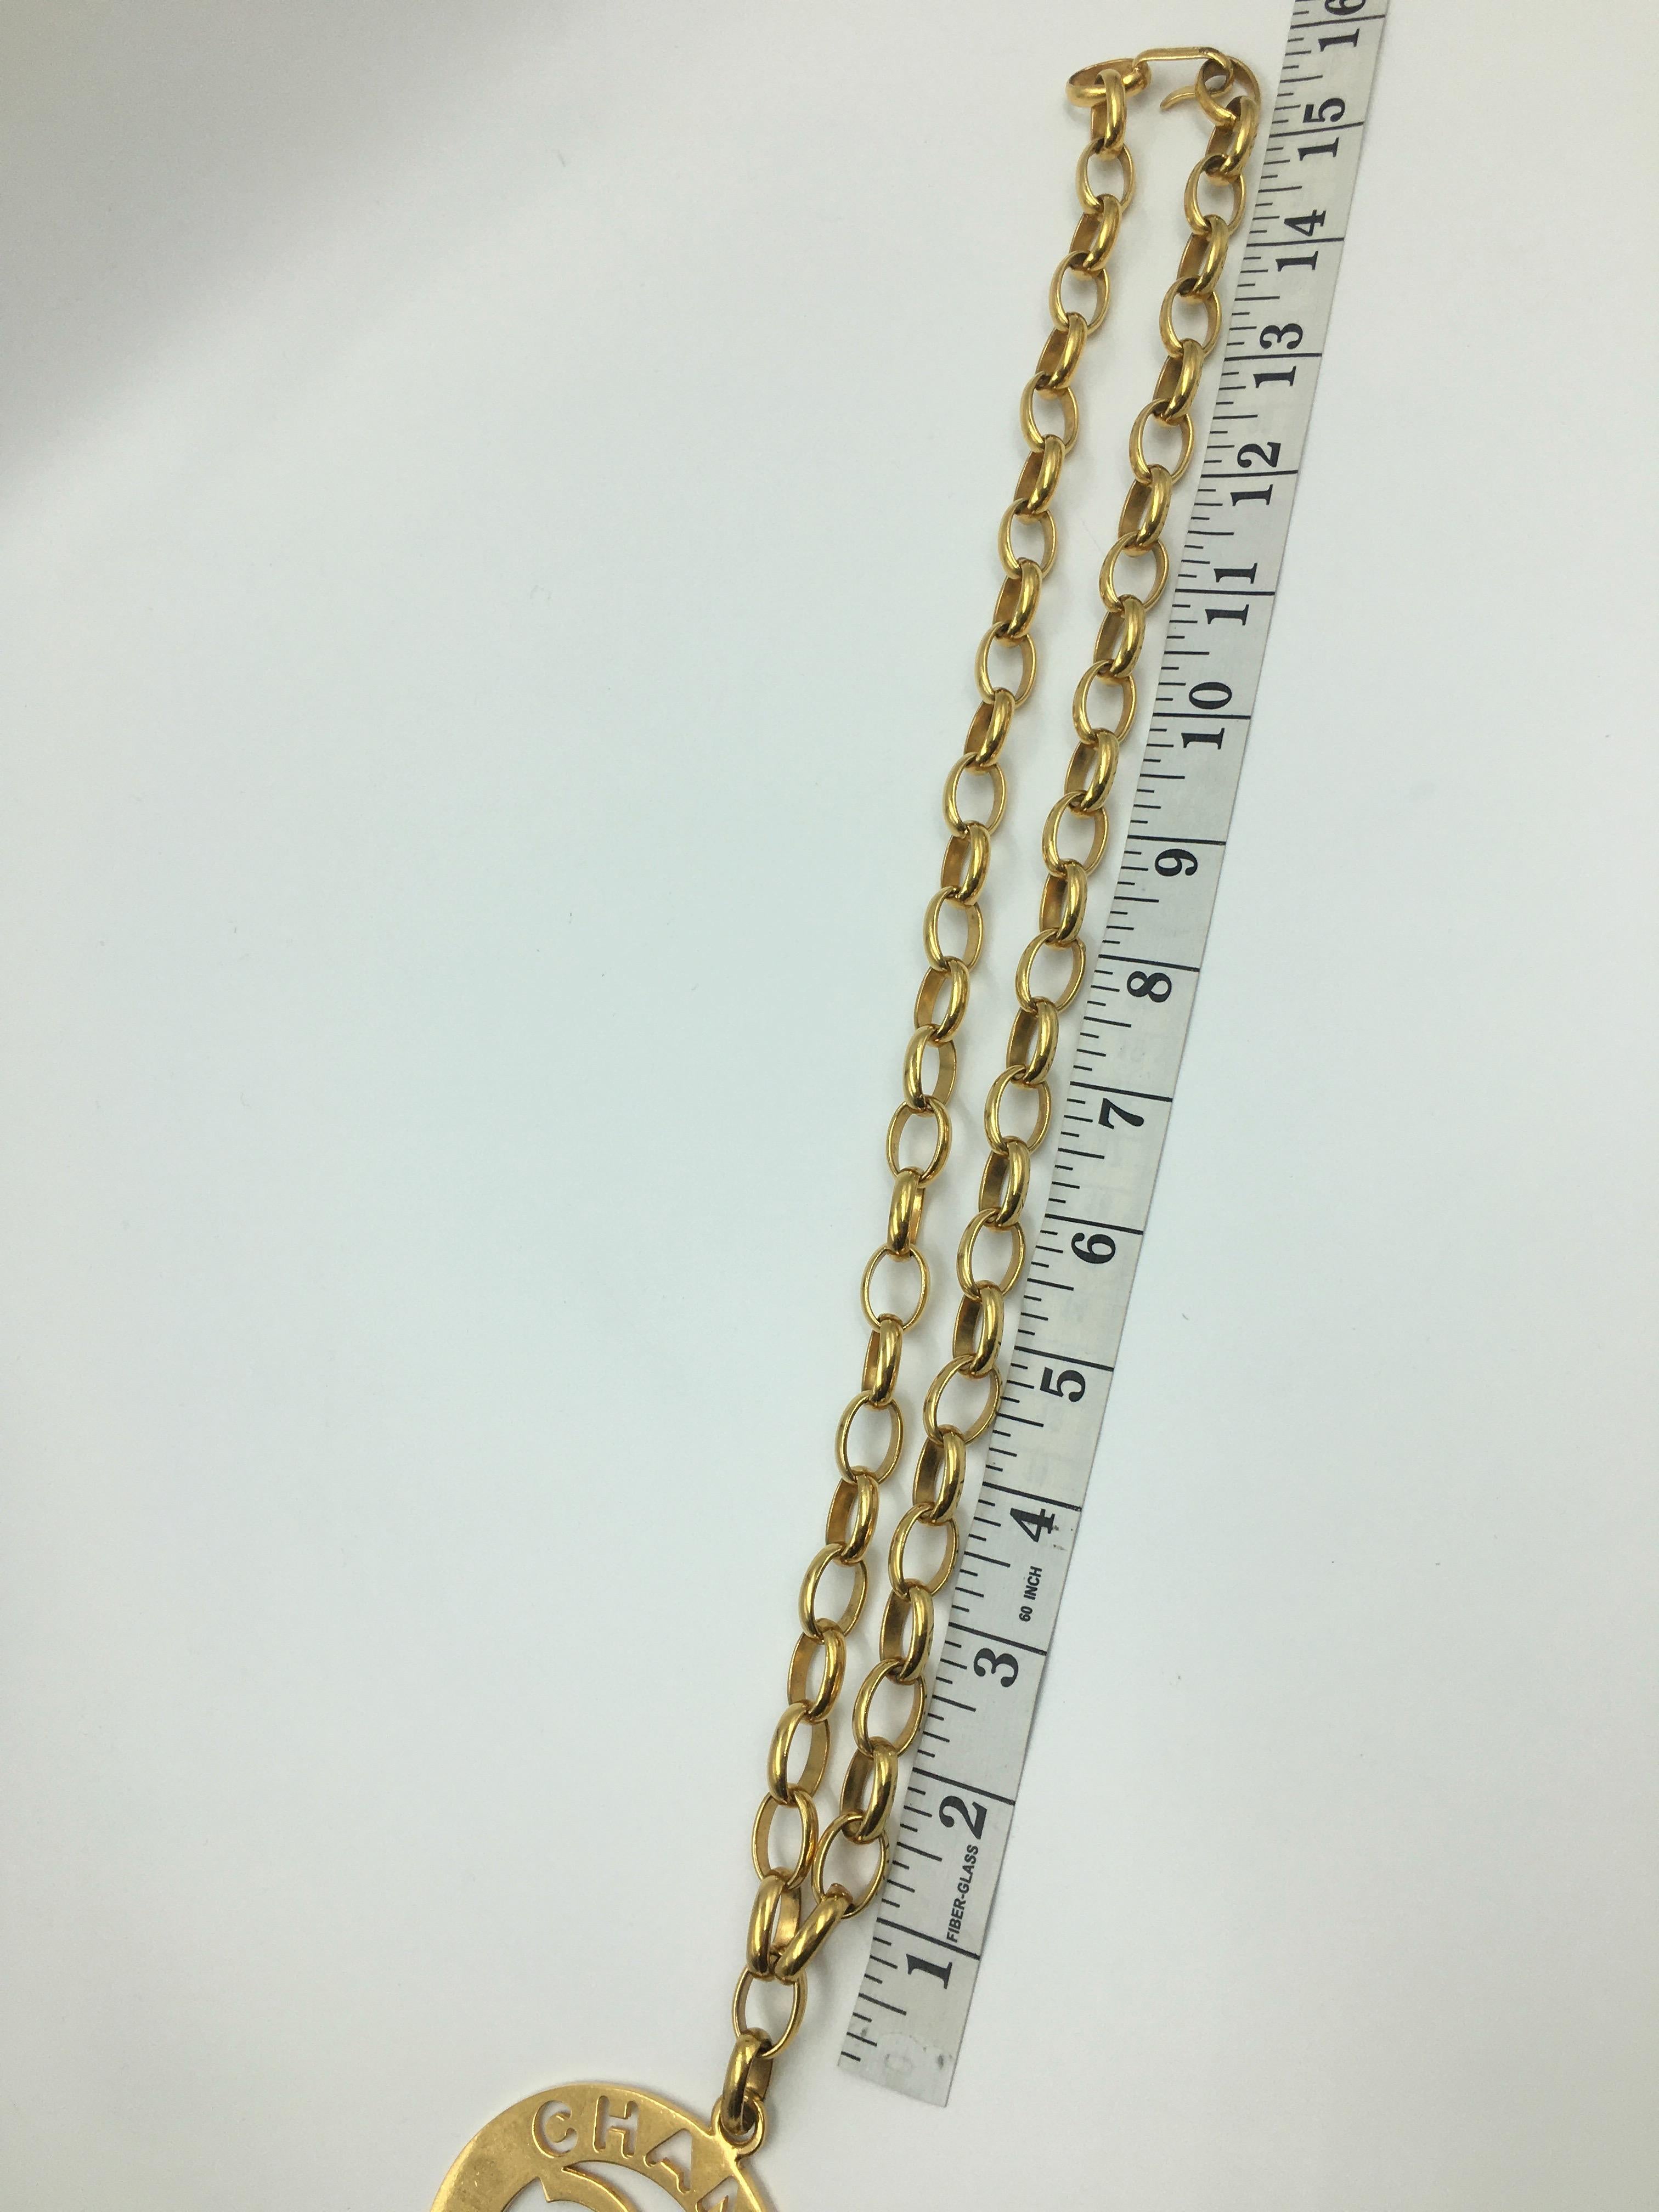 Chanel CC Medallion Necklace Gold Tone Large Iconic statement Piece In Good Condition For Sale In Los Angeles, CA